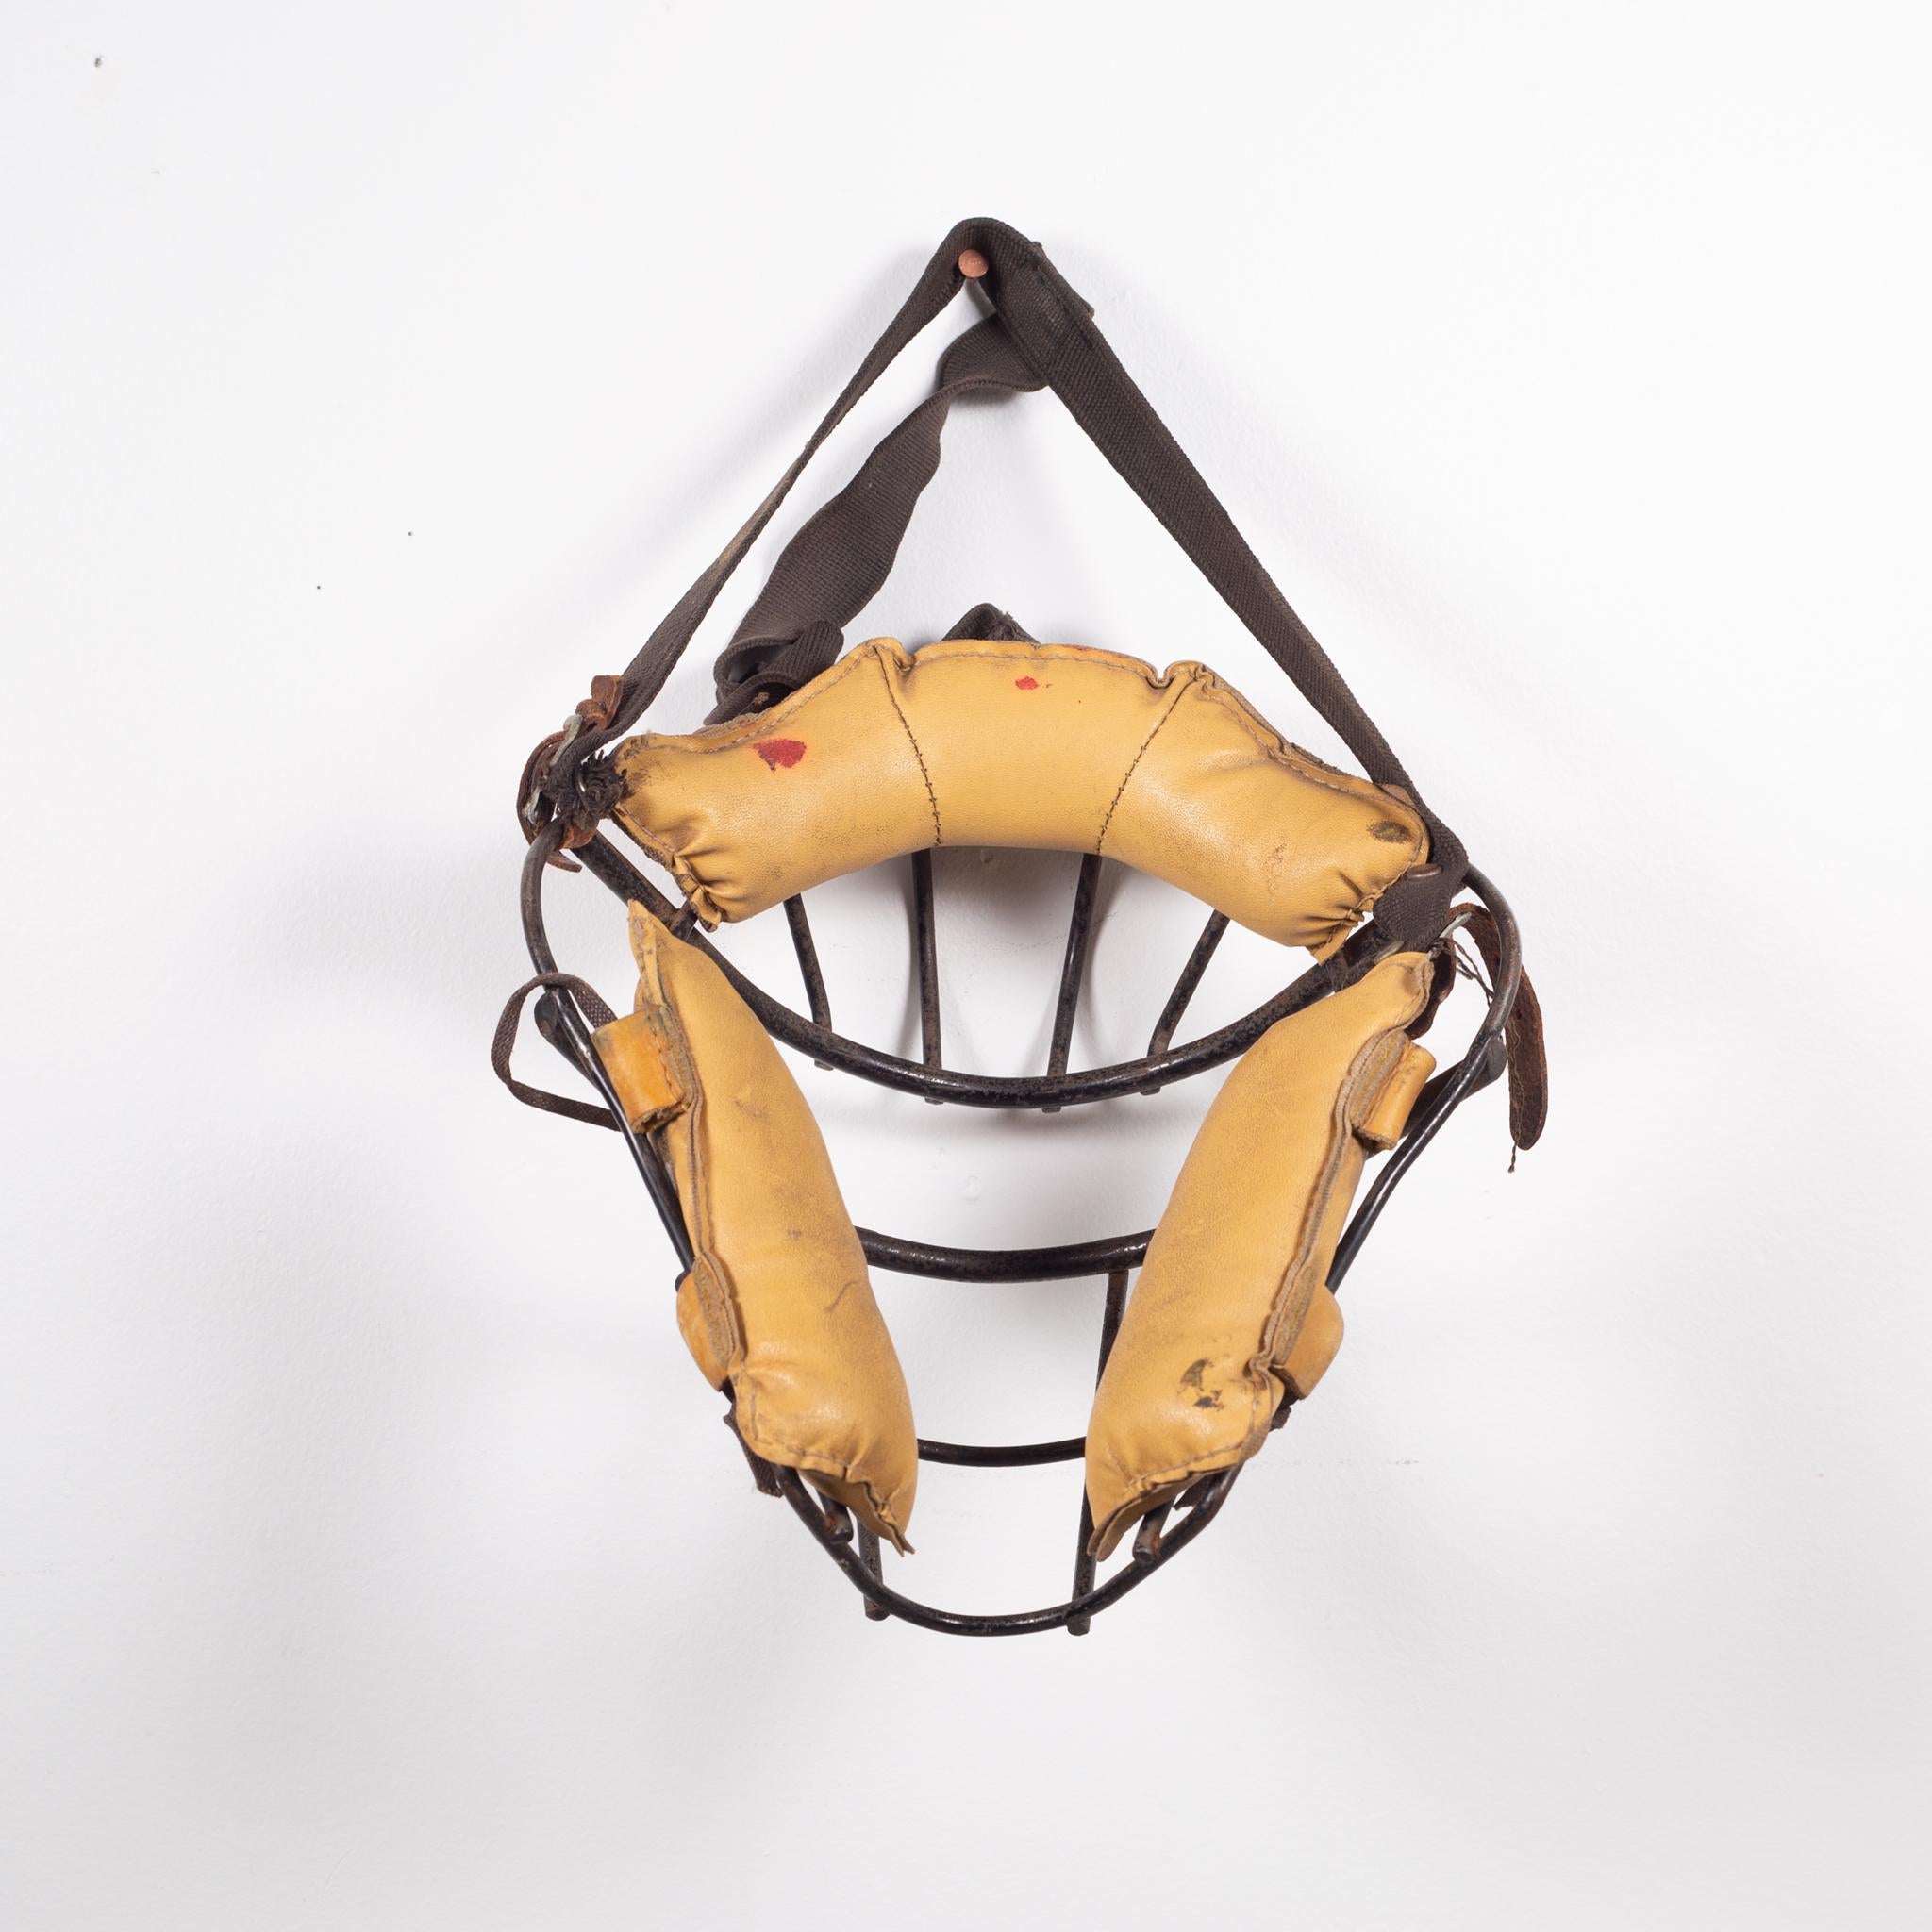 About

This is an original vintage catcher's mask. The main body is heavy steel with thick leather padding and fabric head strap. The padding is held onto the body of the mask by leather straps with snaps. The piece has retained most of it's